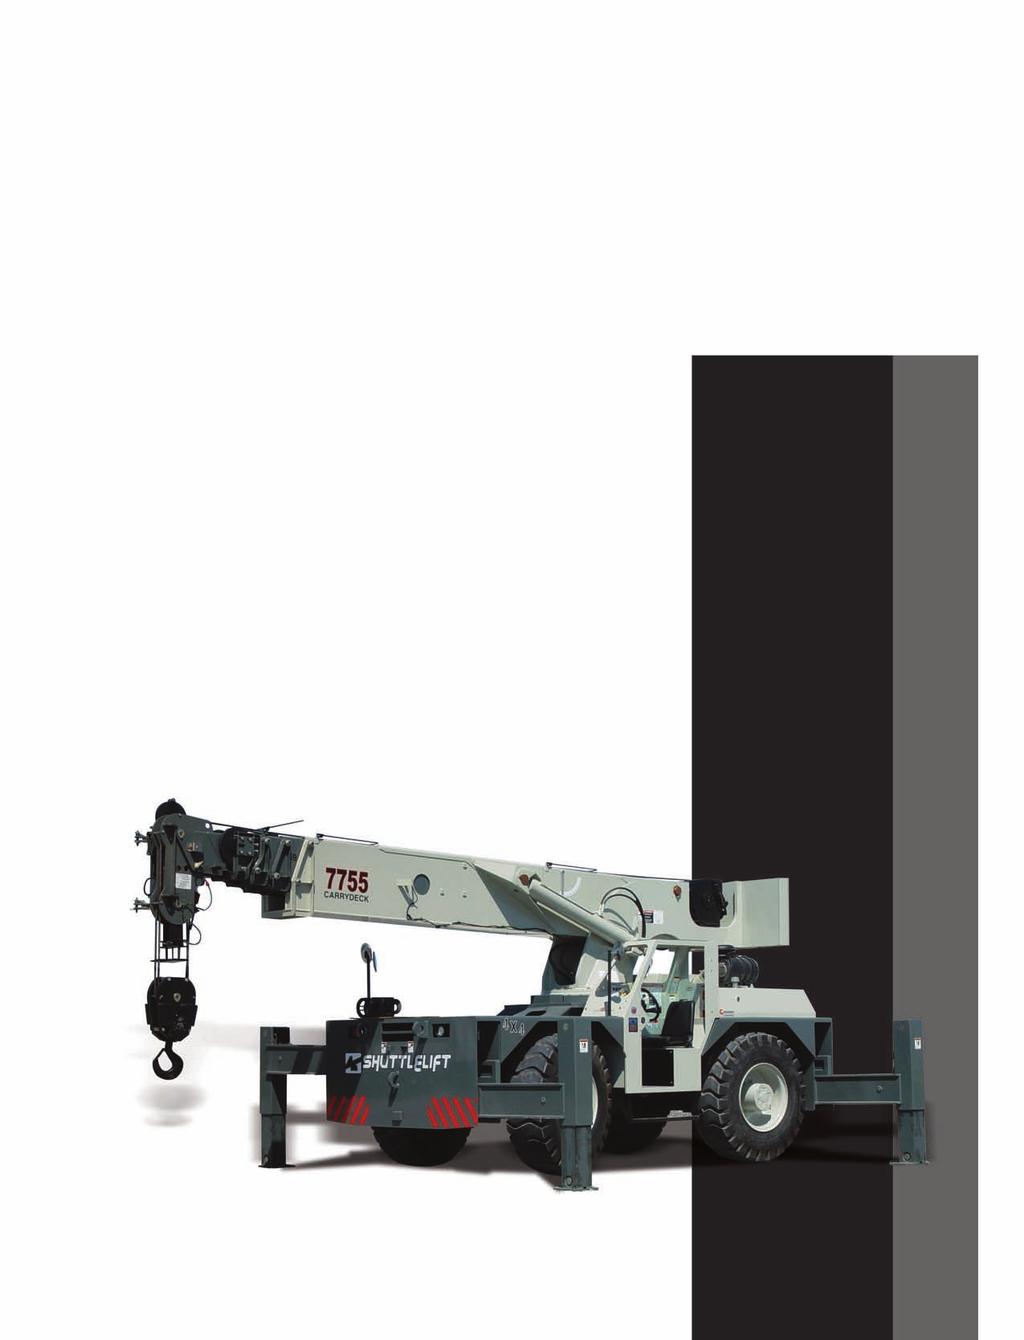 product guide features 22 ton (19.9 mt) capacity 360 on outriggers @ 8.5 ft. (2.6m) radius 15 ton (13.6 mt) deck carrying capacity 15 ton (13.6 mt) on rubber capacity 43 ft. (13.1m) 3-section boom or 67 ft.